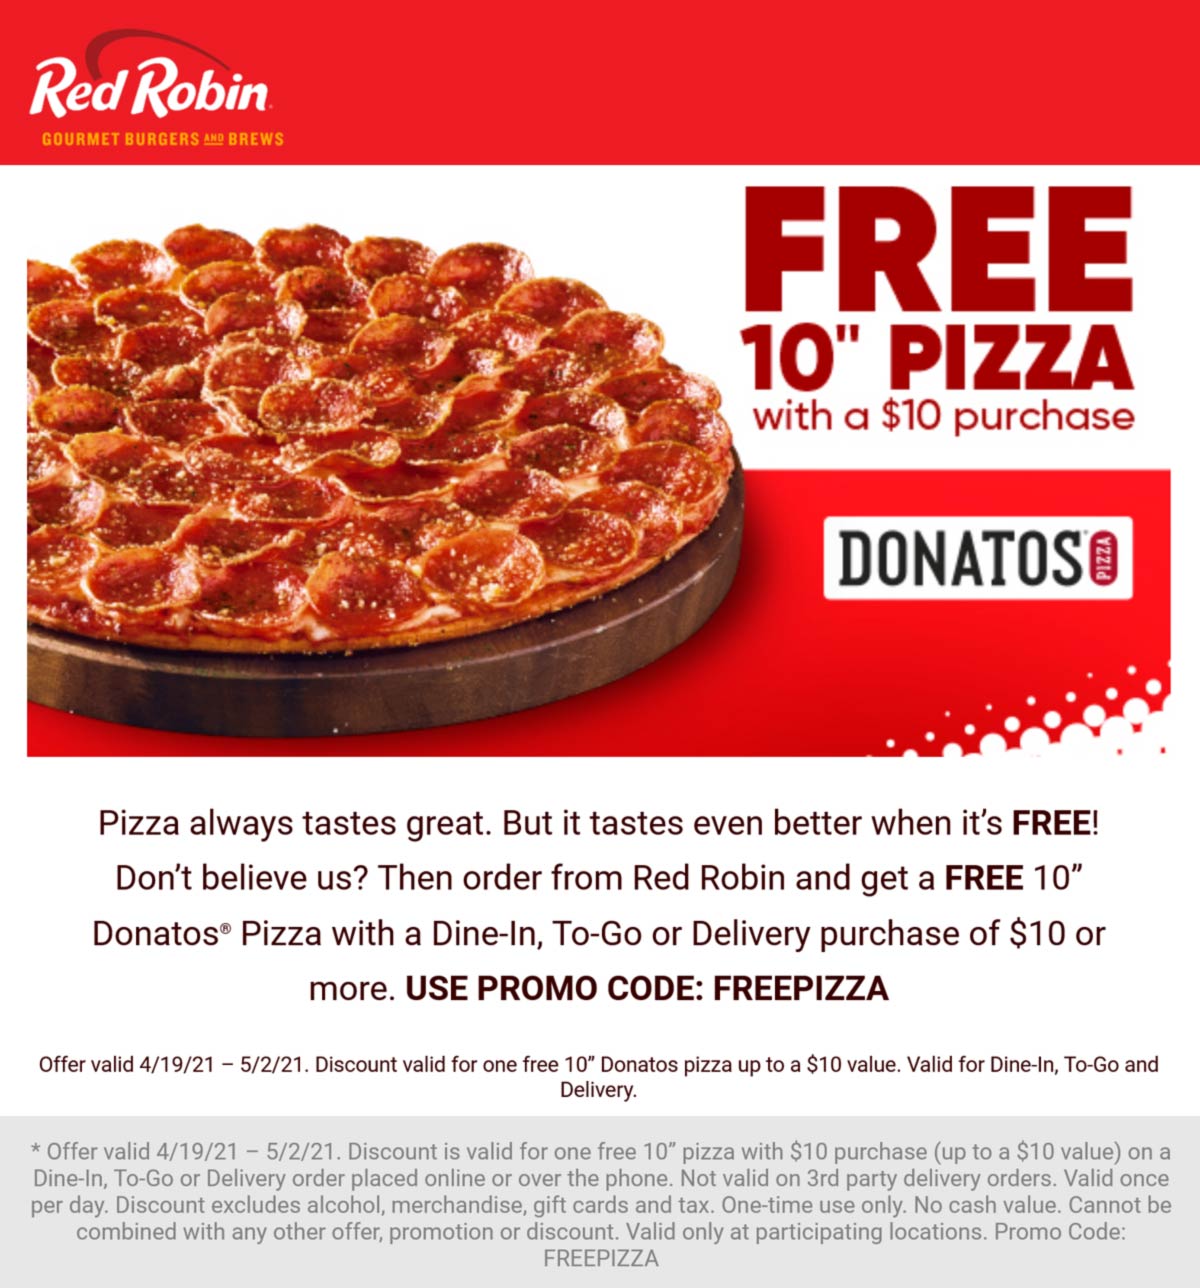 Red Robin restaurants Coupon  Free pizza with $10 spent at Red Robin via promo code FREEPIZZA #redrobin 